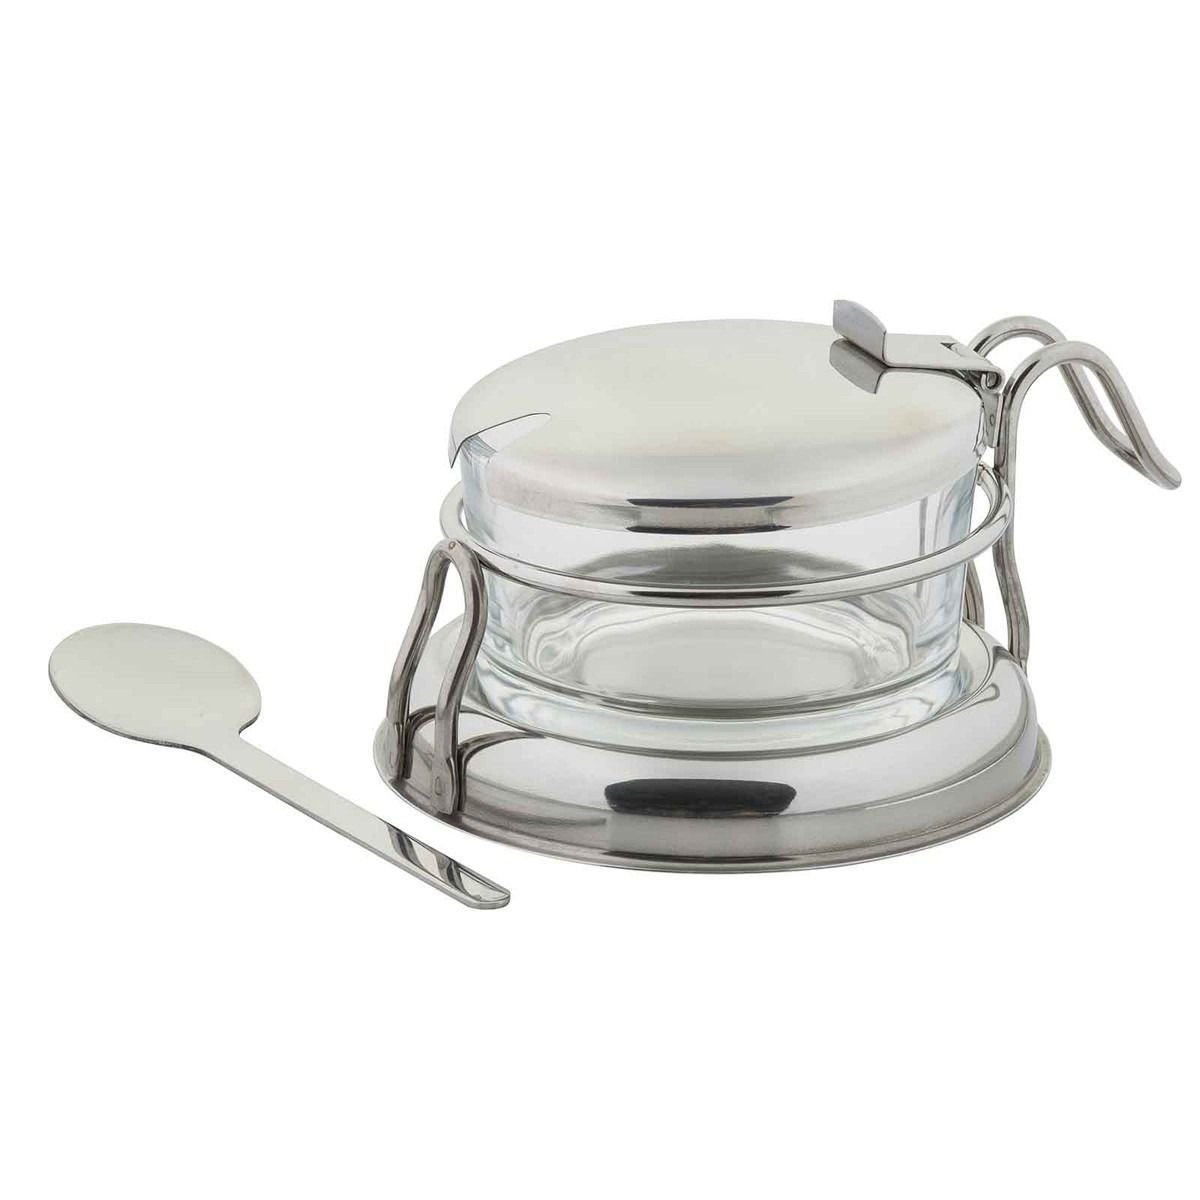  Oggi 4pc Clear Canister Set with Clamp Lids & Spoons